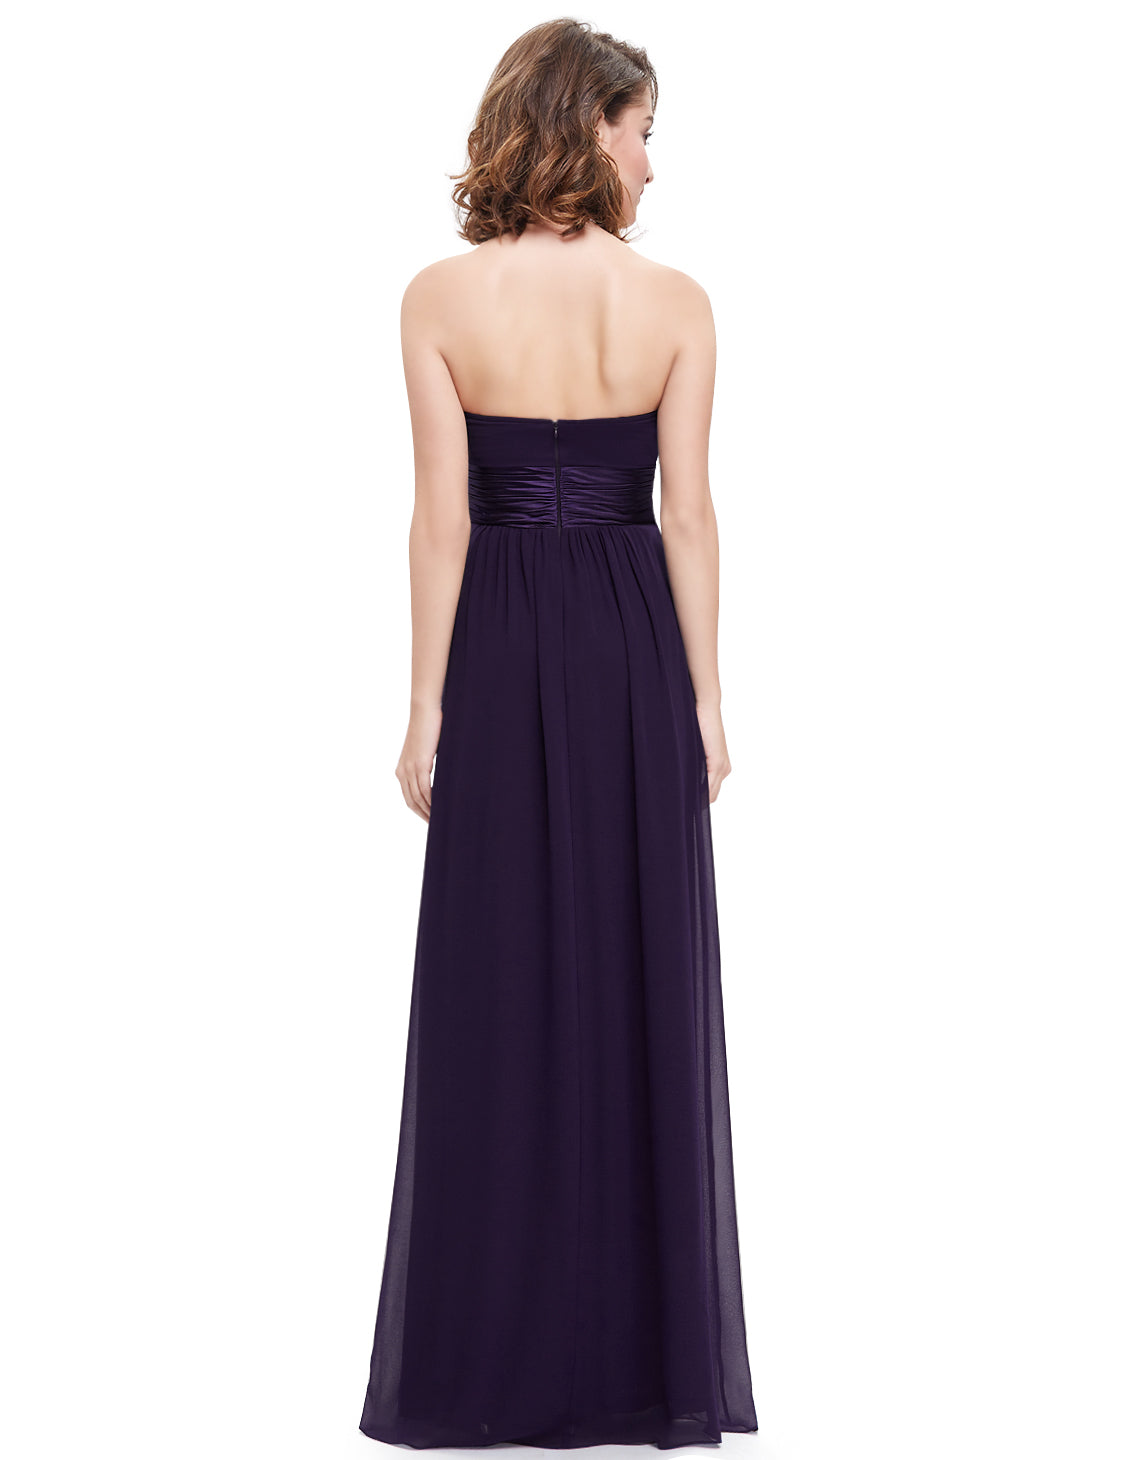 Strapless Ruched Bust Burgundy Chiffon Long Evening Dress EP09955